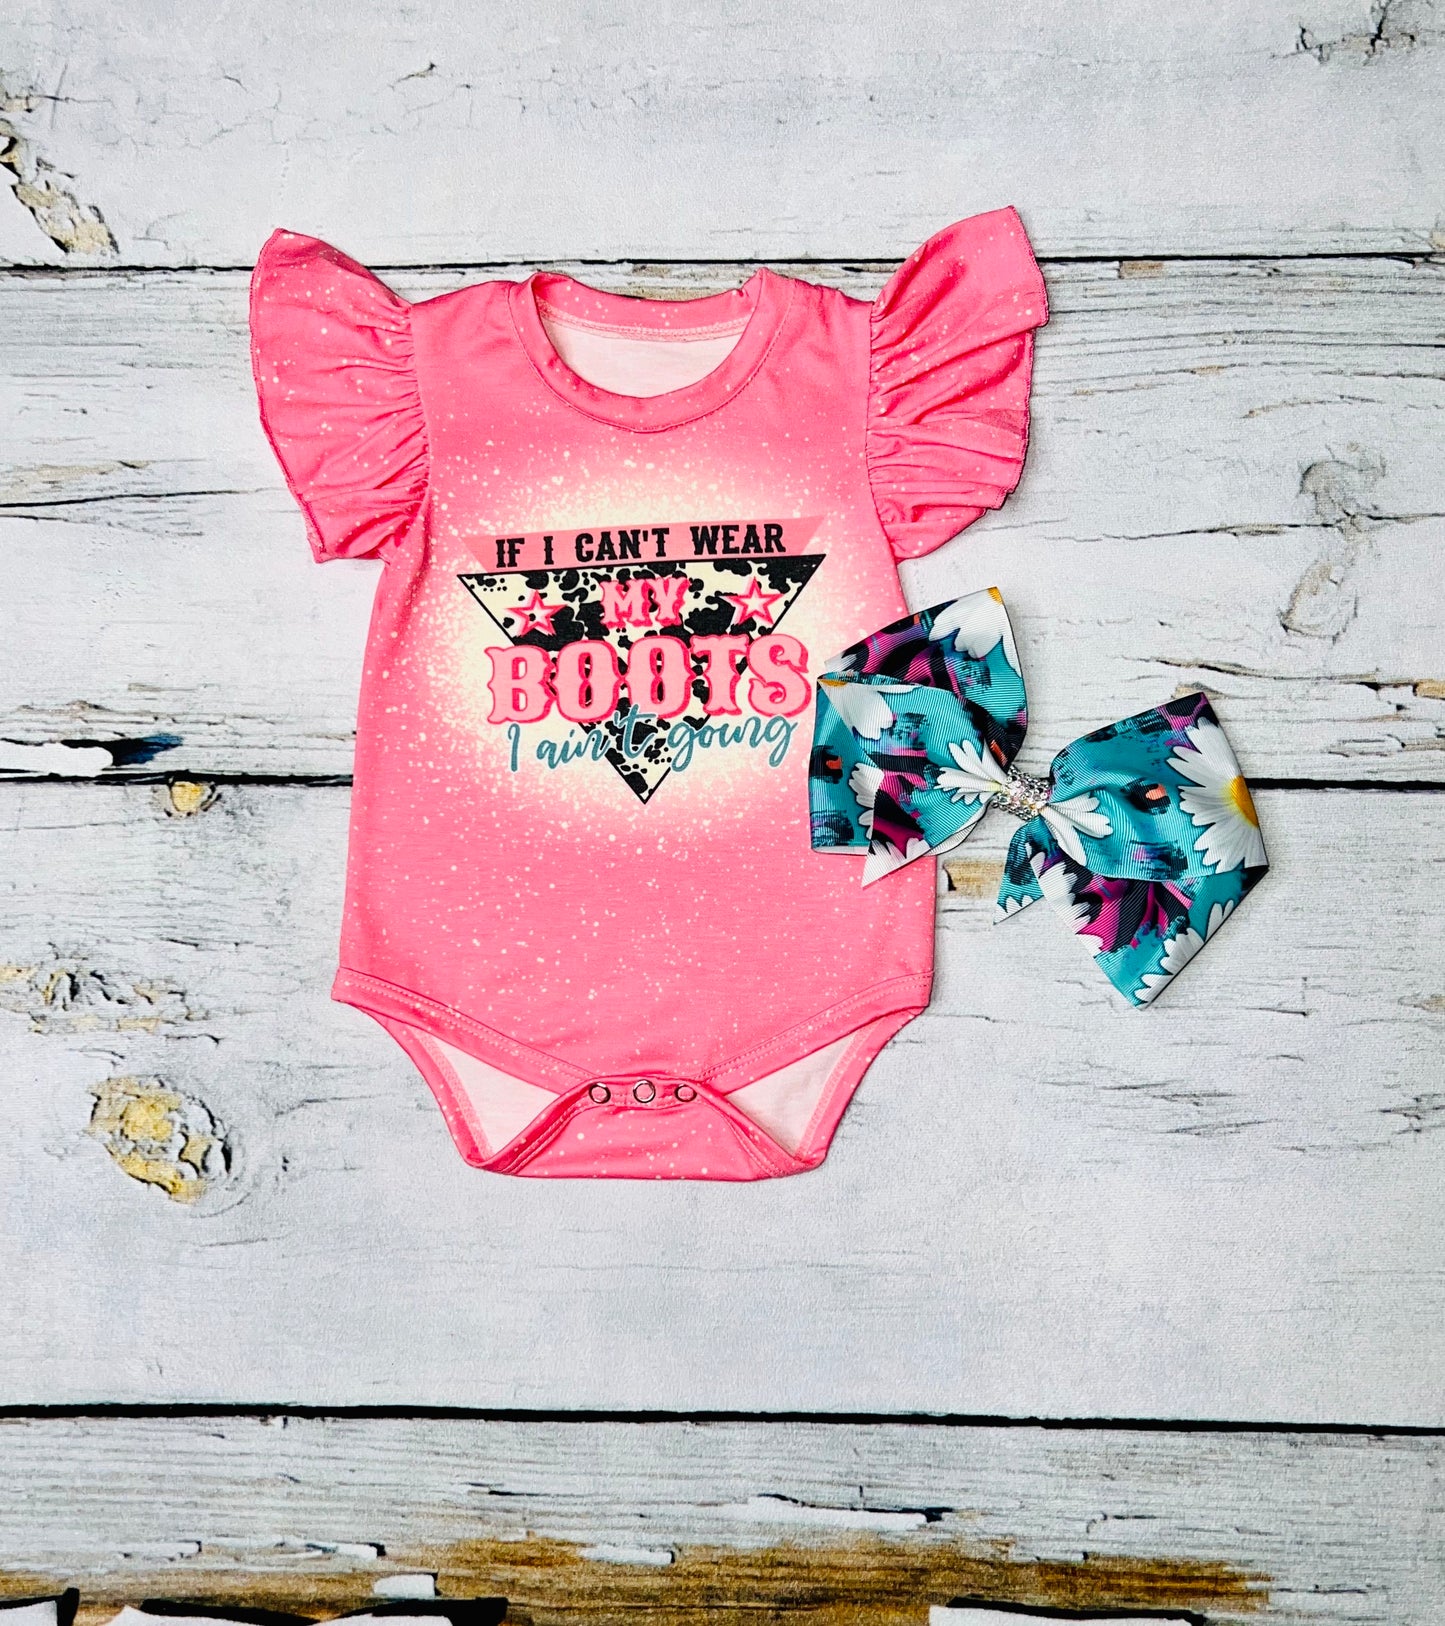 "IF I CAN'T WEAR MY BOOTS I AIN'T GOING" pink baby onesie DLH1224-10